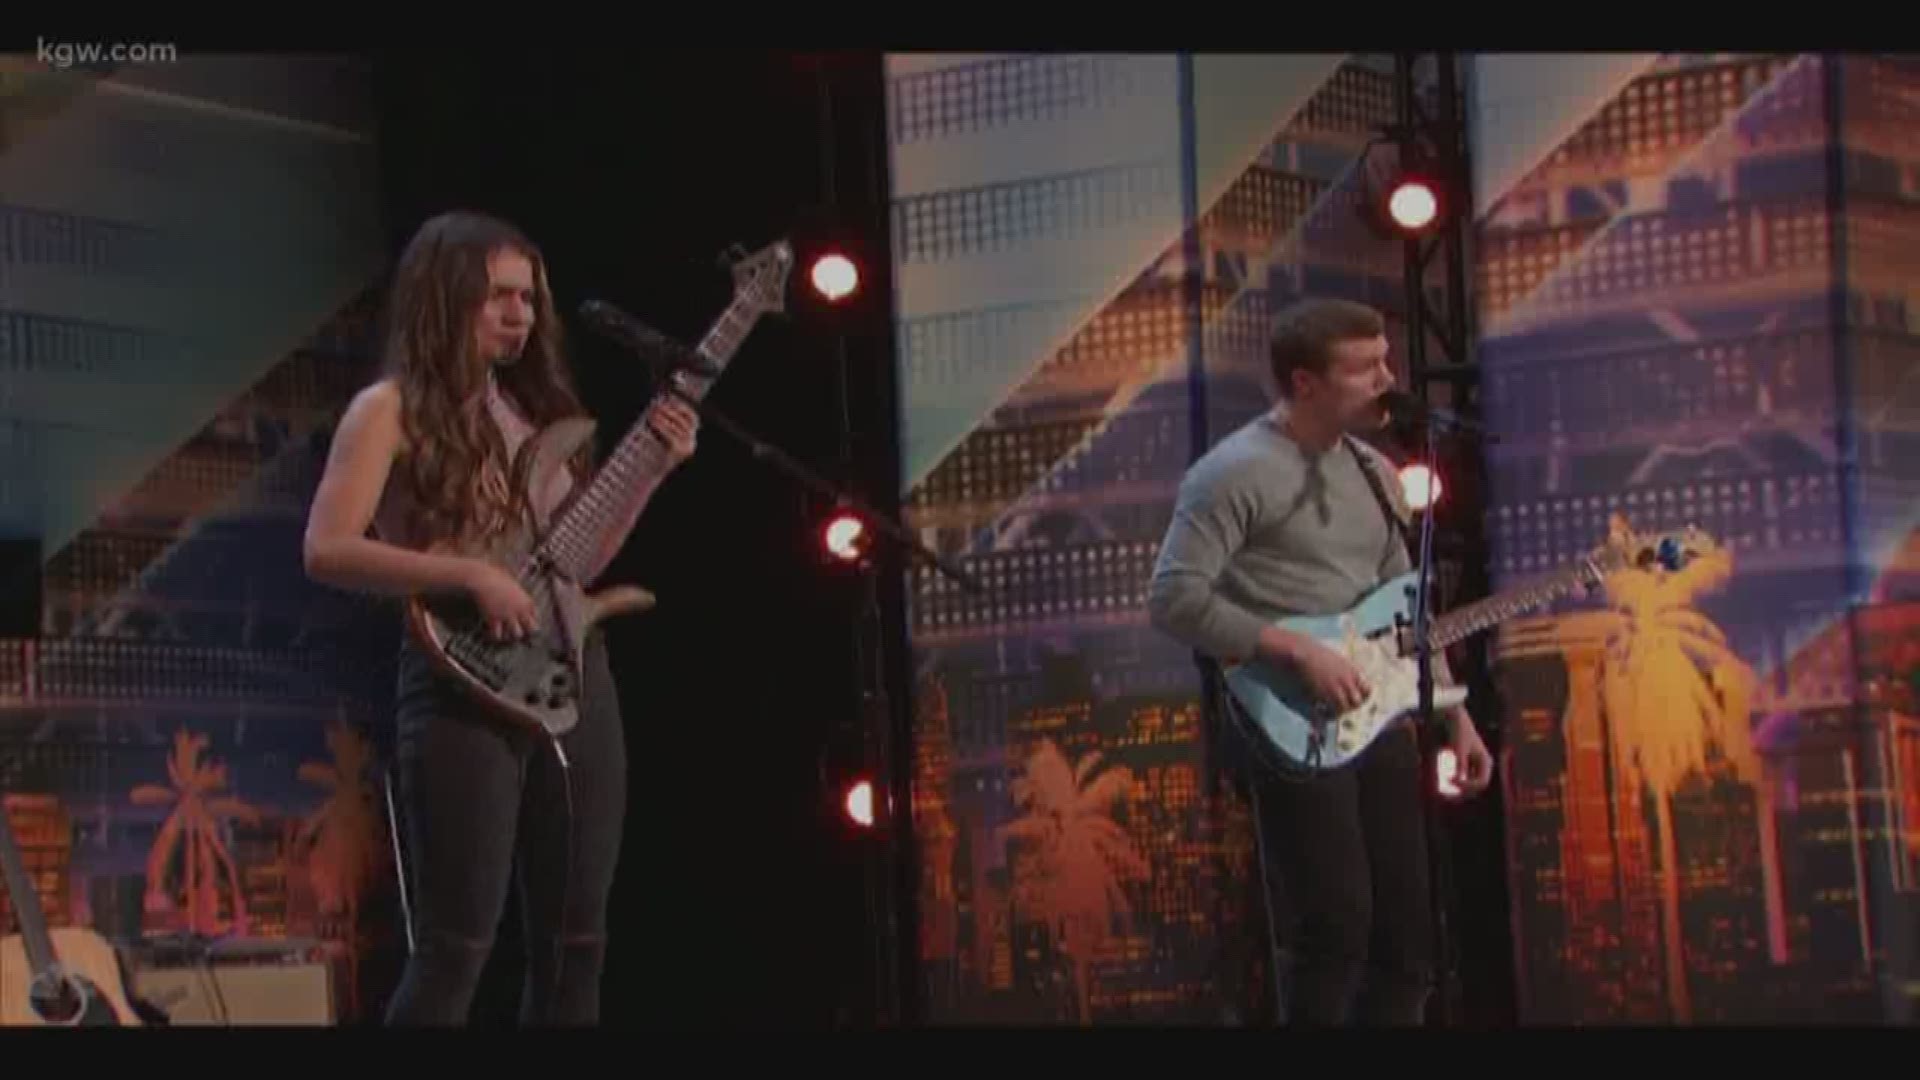 We talk with a local band who appeared on America's Got Talent.